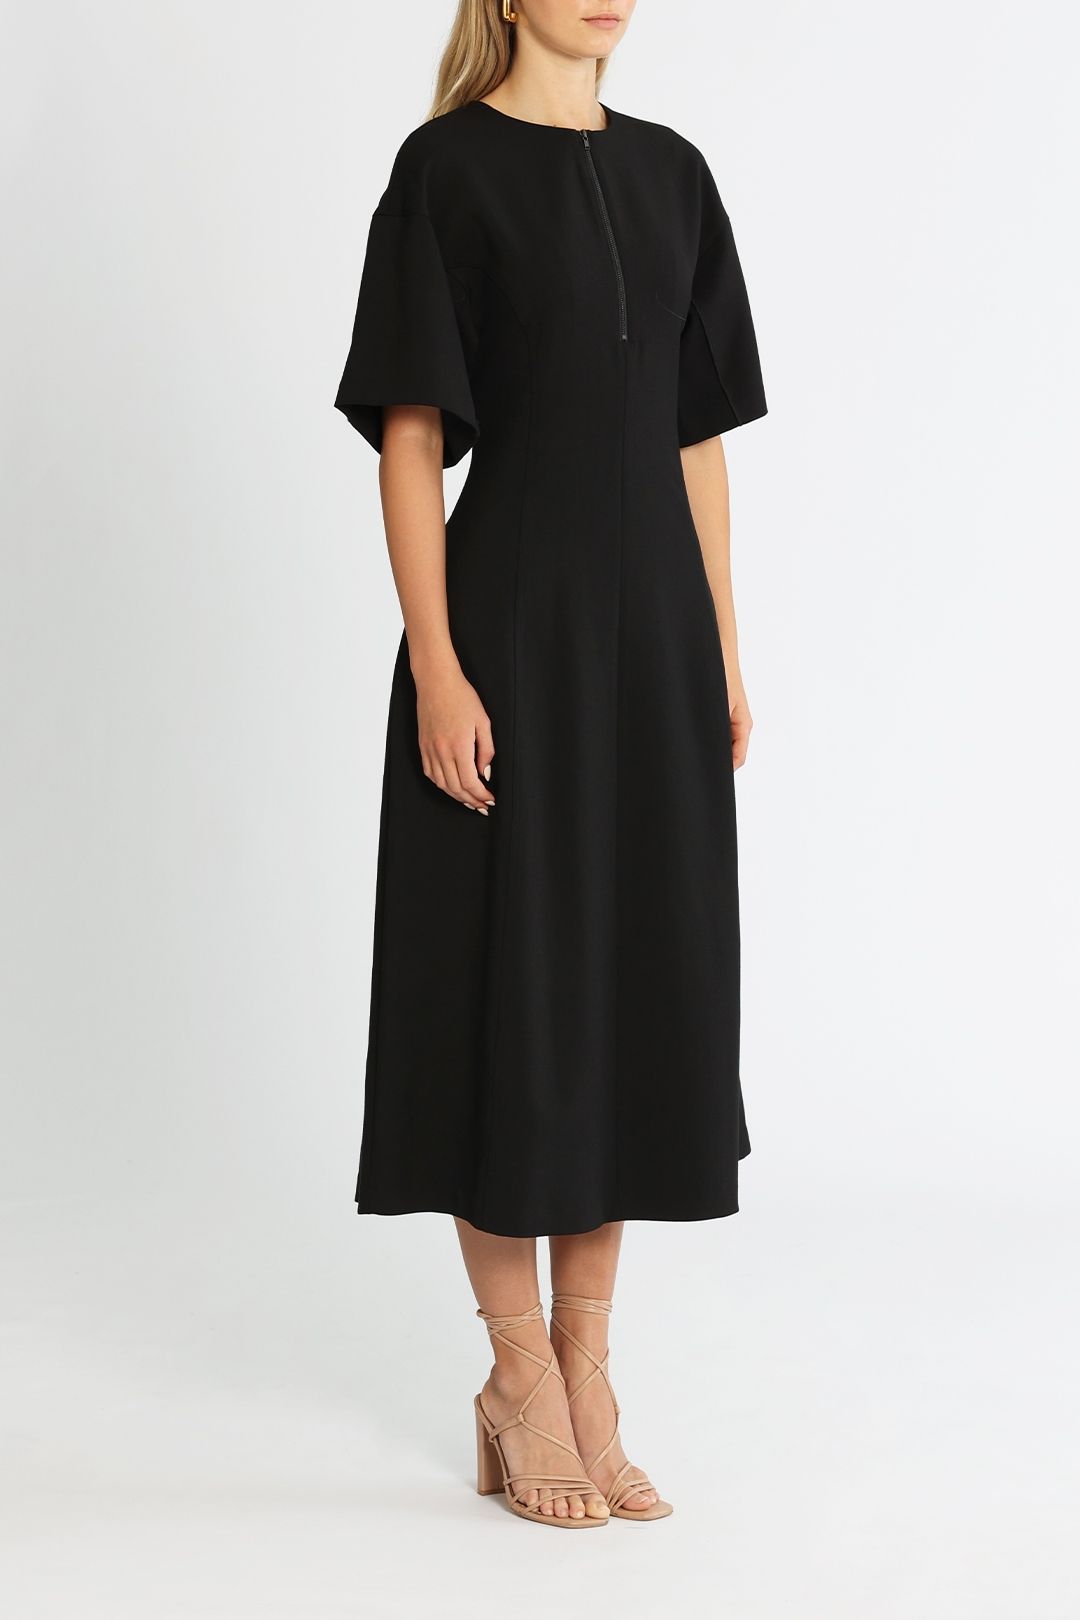 Camilla and Marc Ford Midi Dress Fit and Flare